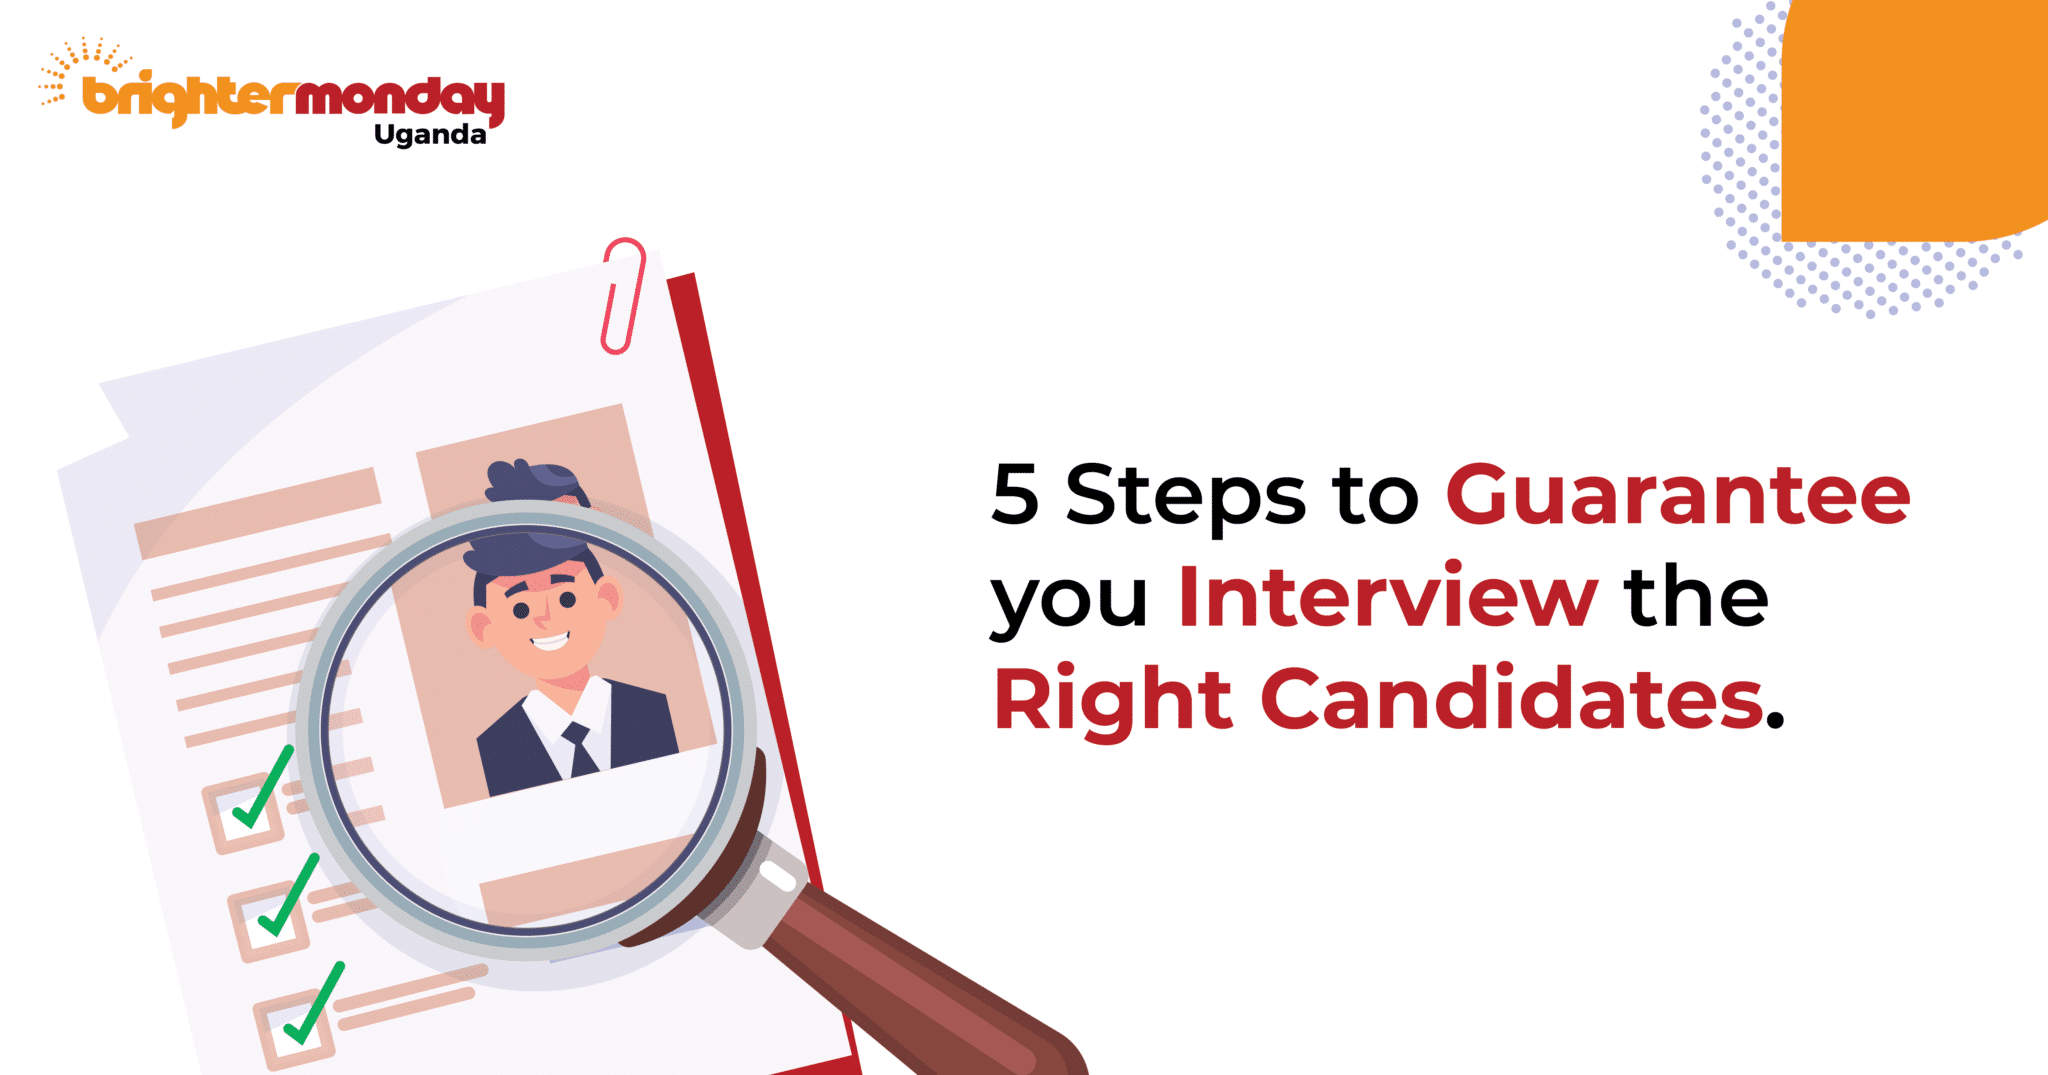 hire the Right candidate